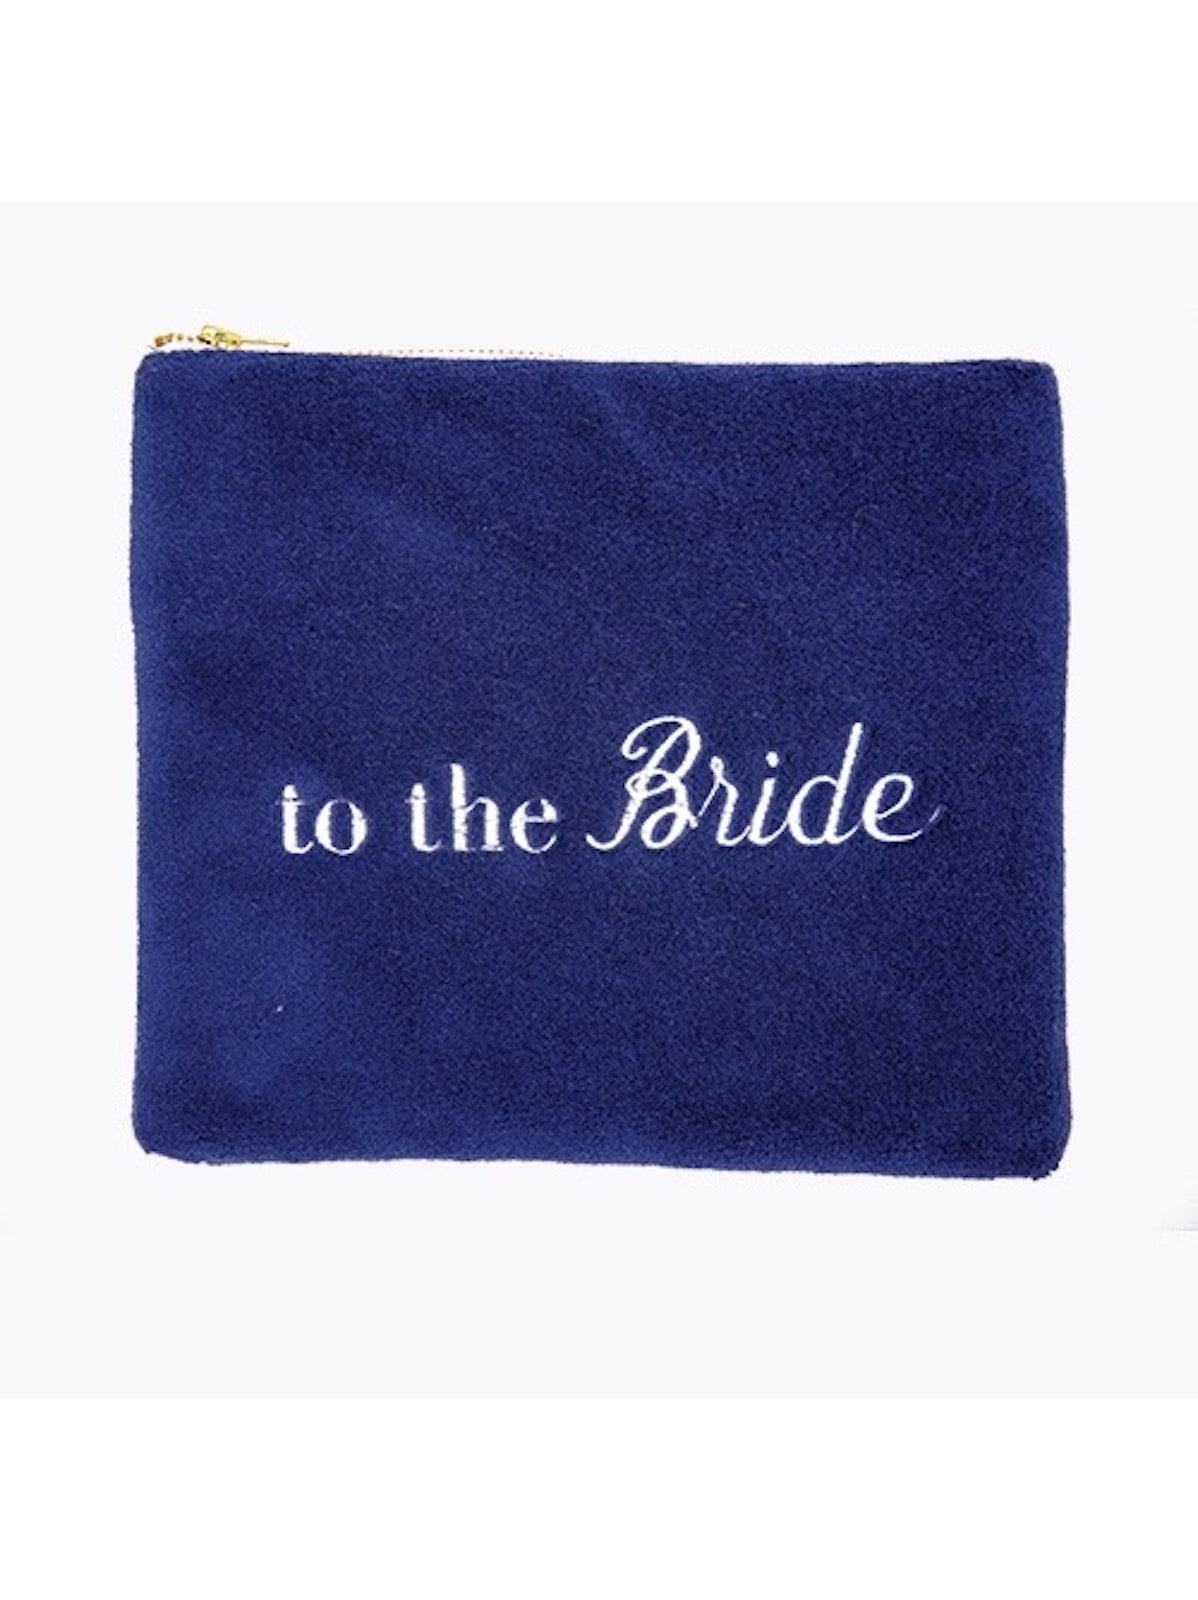 "To the Bride" - Scenery